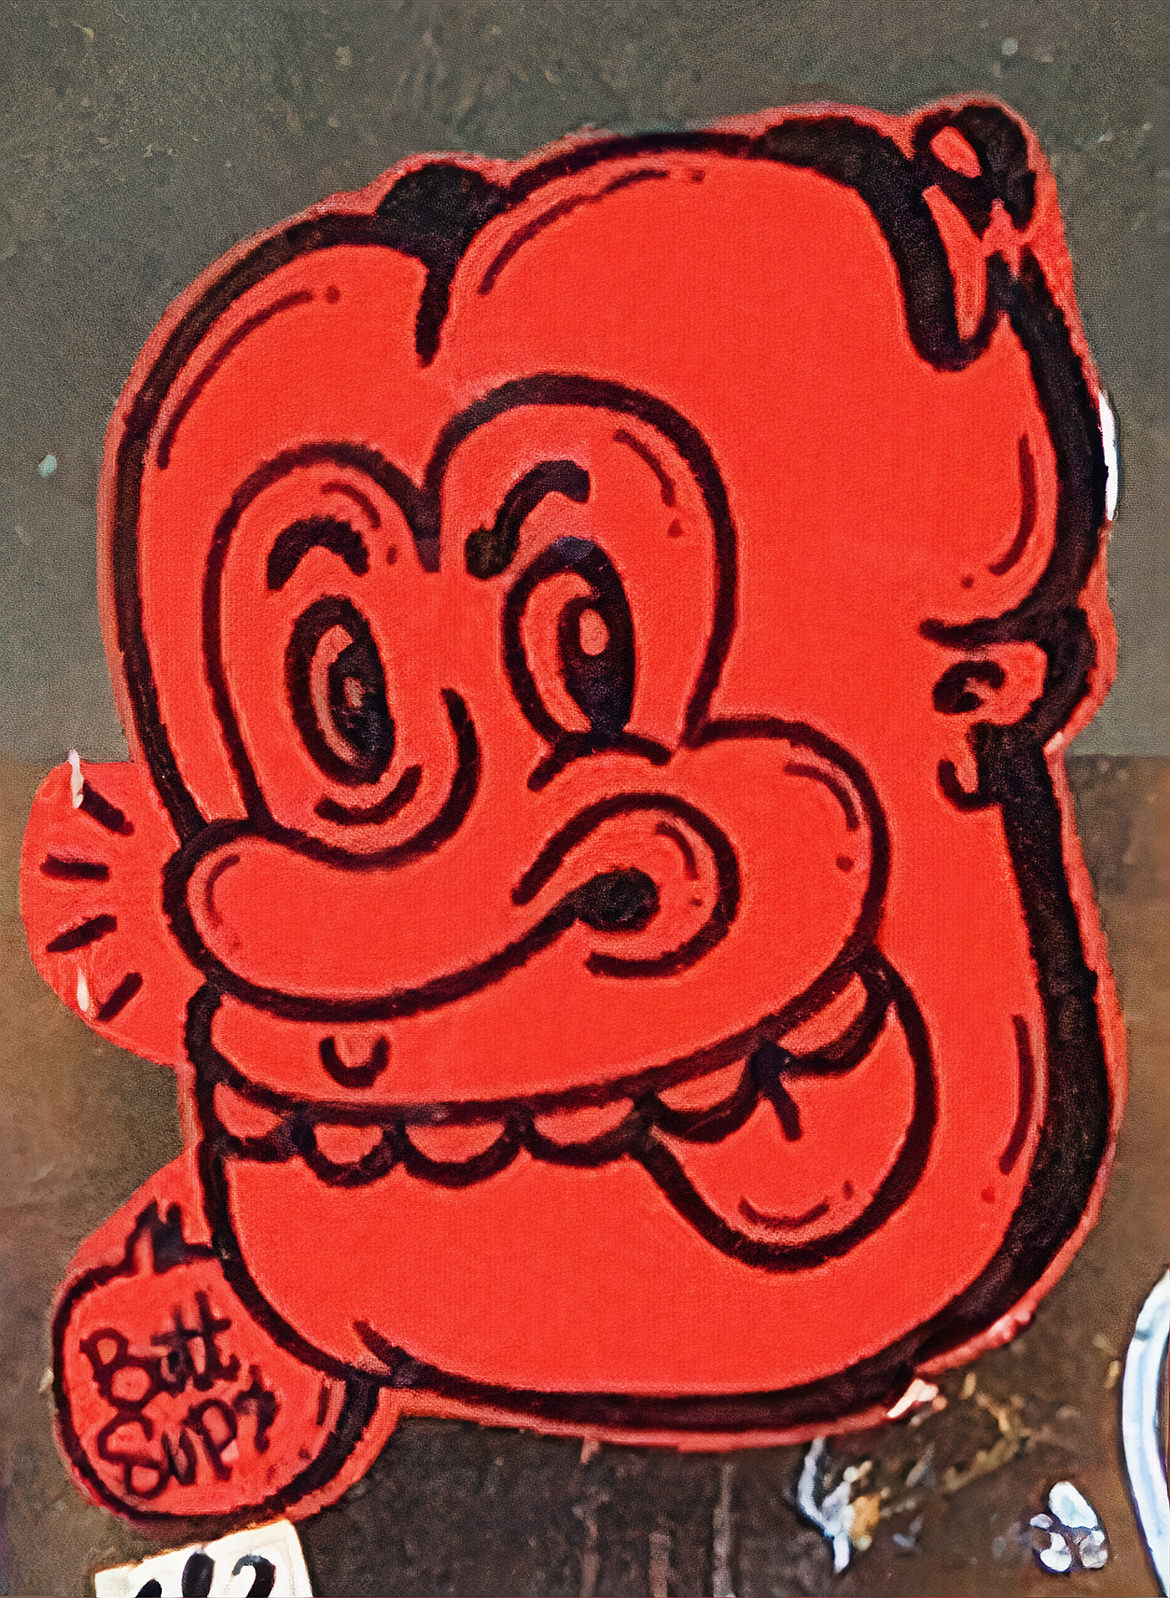 A graffiti sticker of a cartoon face in red and black with the tag "butt sup"